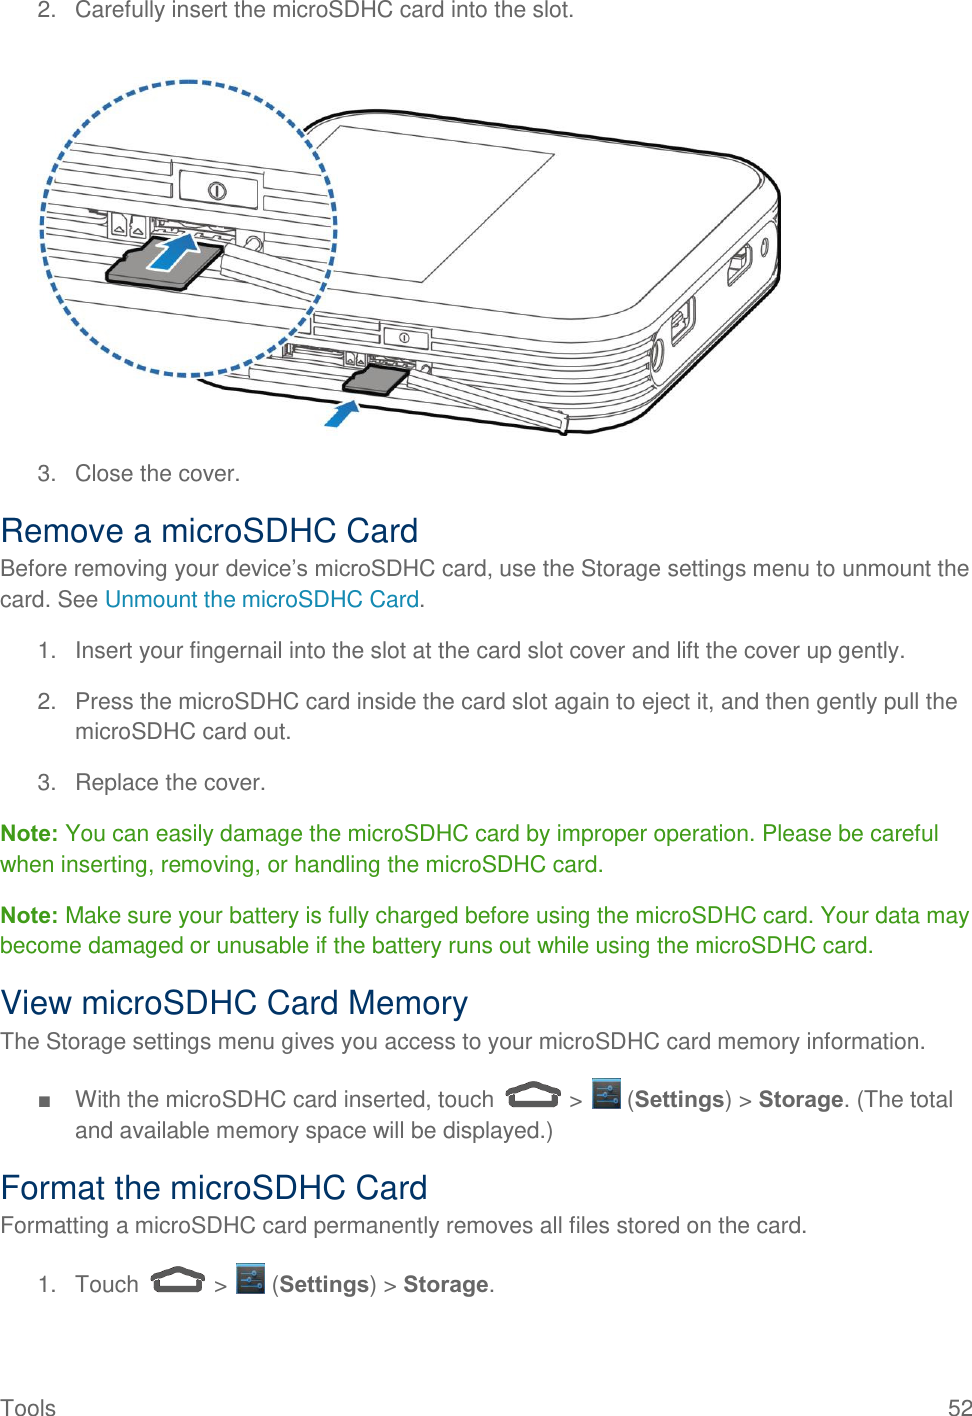  Tools                                                                                                                                            52 2.  Carefully insert the microSDHC card into the slot.   3.  Close the cover. Remove a microSDHC Card Before removing your device’s microSDHC card, use the Storage settings menu to unmount the card. See Unmount the microSDHC Card. 1.  Insert your fingernail into the slot at the card slot cover and lift the cover up gently. 2.  Press the microSDHC card inside the card slot again to eject it, and then gently pull the microSDHC card out. 3. Replace the cover. Note: You can easily damage the microSDHC card by improper operation. Please be careful when inserting, removing, or handling the microSDHC card. Note: Make sure your battery is fully charged before using the microSDHC card. Your data may become damaged or unusable if the battery runs out while using the microSDHC card. View microSDHC Card Memory The Storage settings menu gives you access to your microSDHC card memory information. ■  With the microSDHC card inserted, touch   &gt;   (Settings) &gt; Storage. (The total and available memory space will be displayed.) Format the microSDHC Card Formatting a microSDHC card permanently removes all files stored on the card. 1.  Touch   &gt;   (Settings) &gt; Storage. 